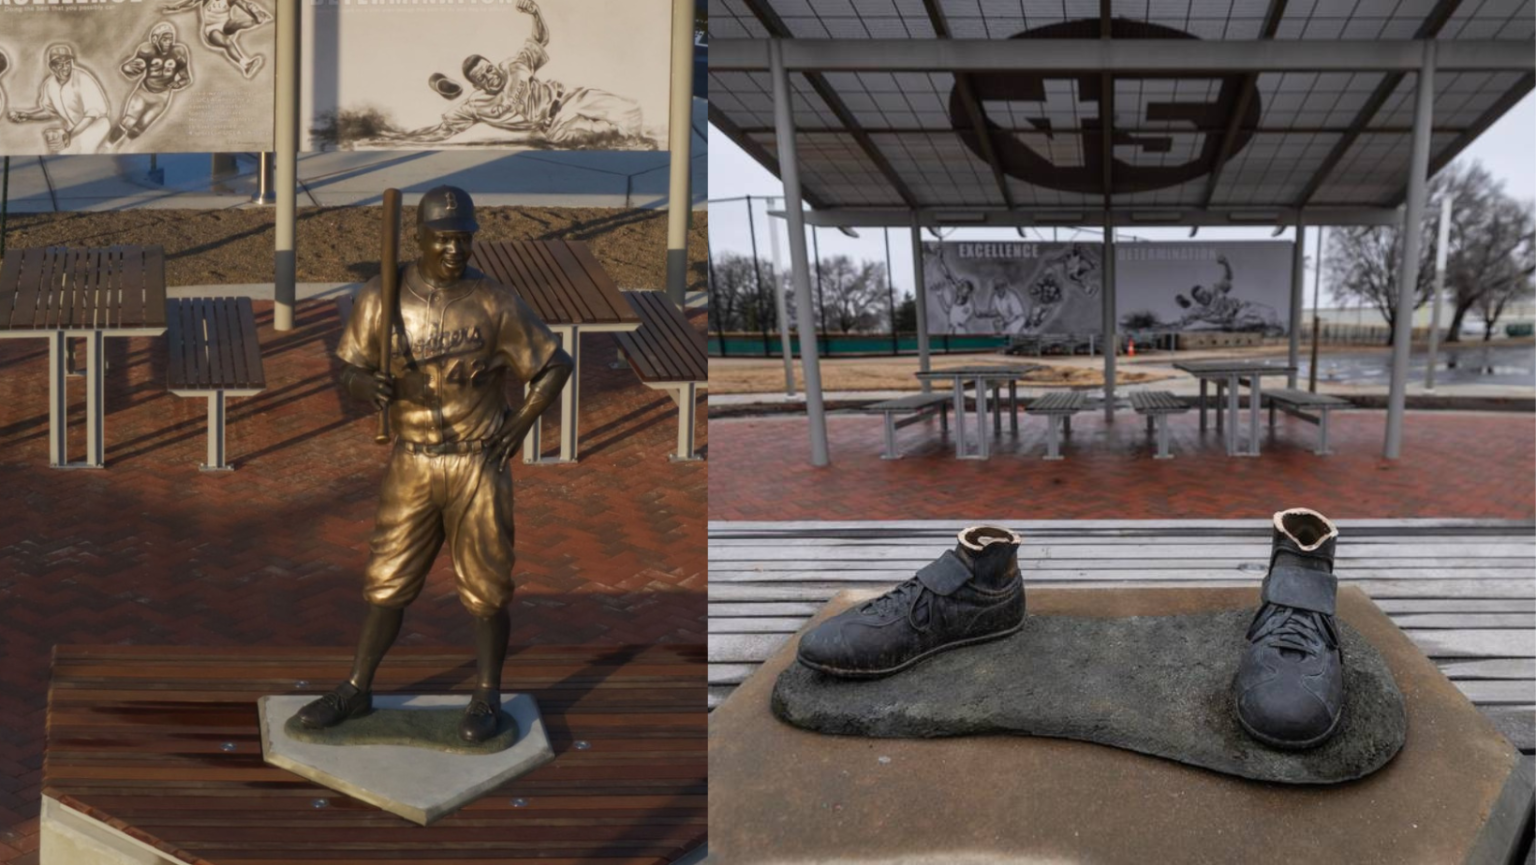 Who is dressing the bronze sculptures in downtown Wichita, Kansas? Who is  undressing them? - Quora